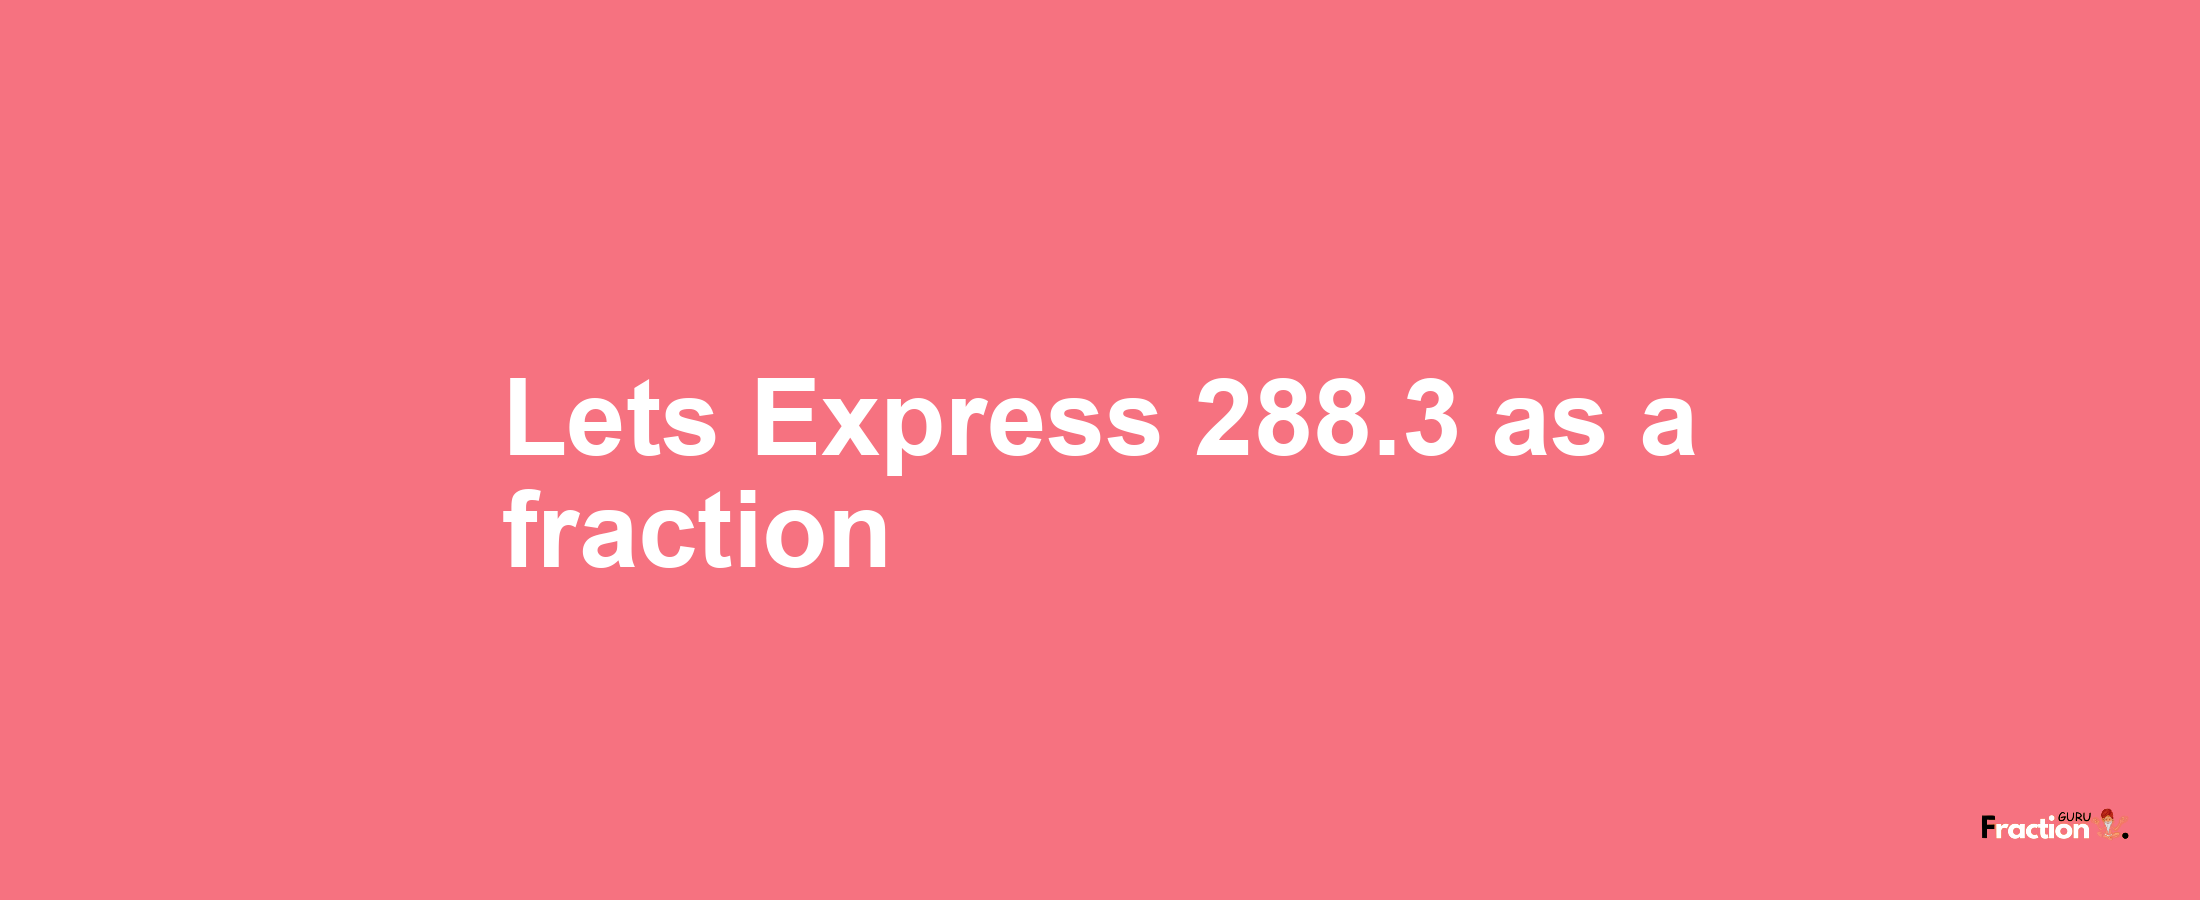 Lets Express 288.3 as afraction